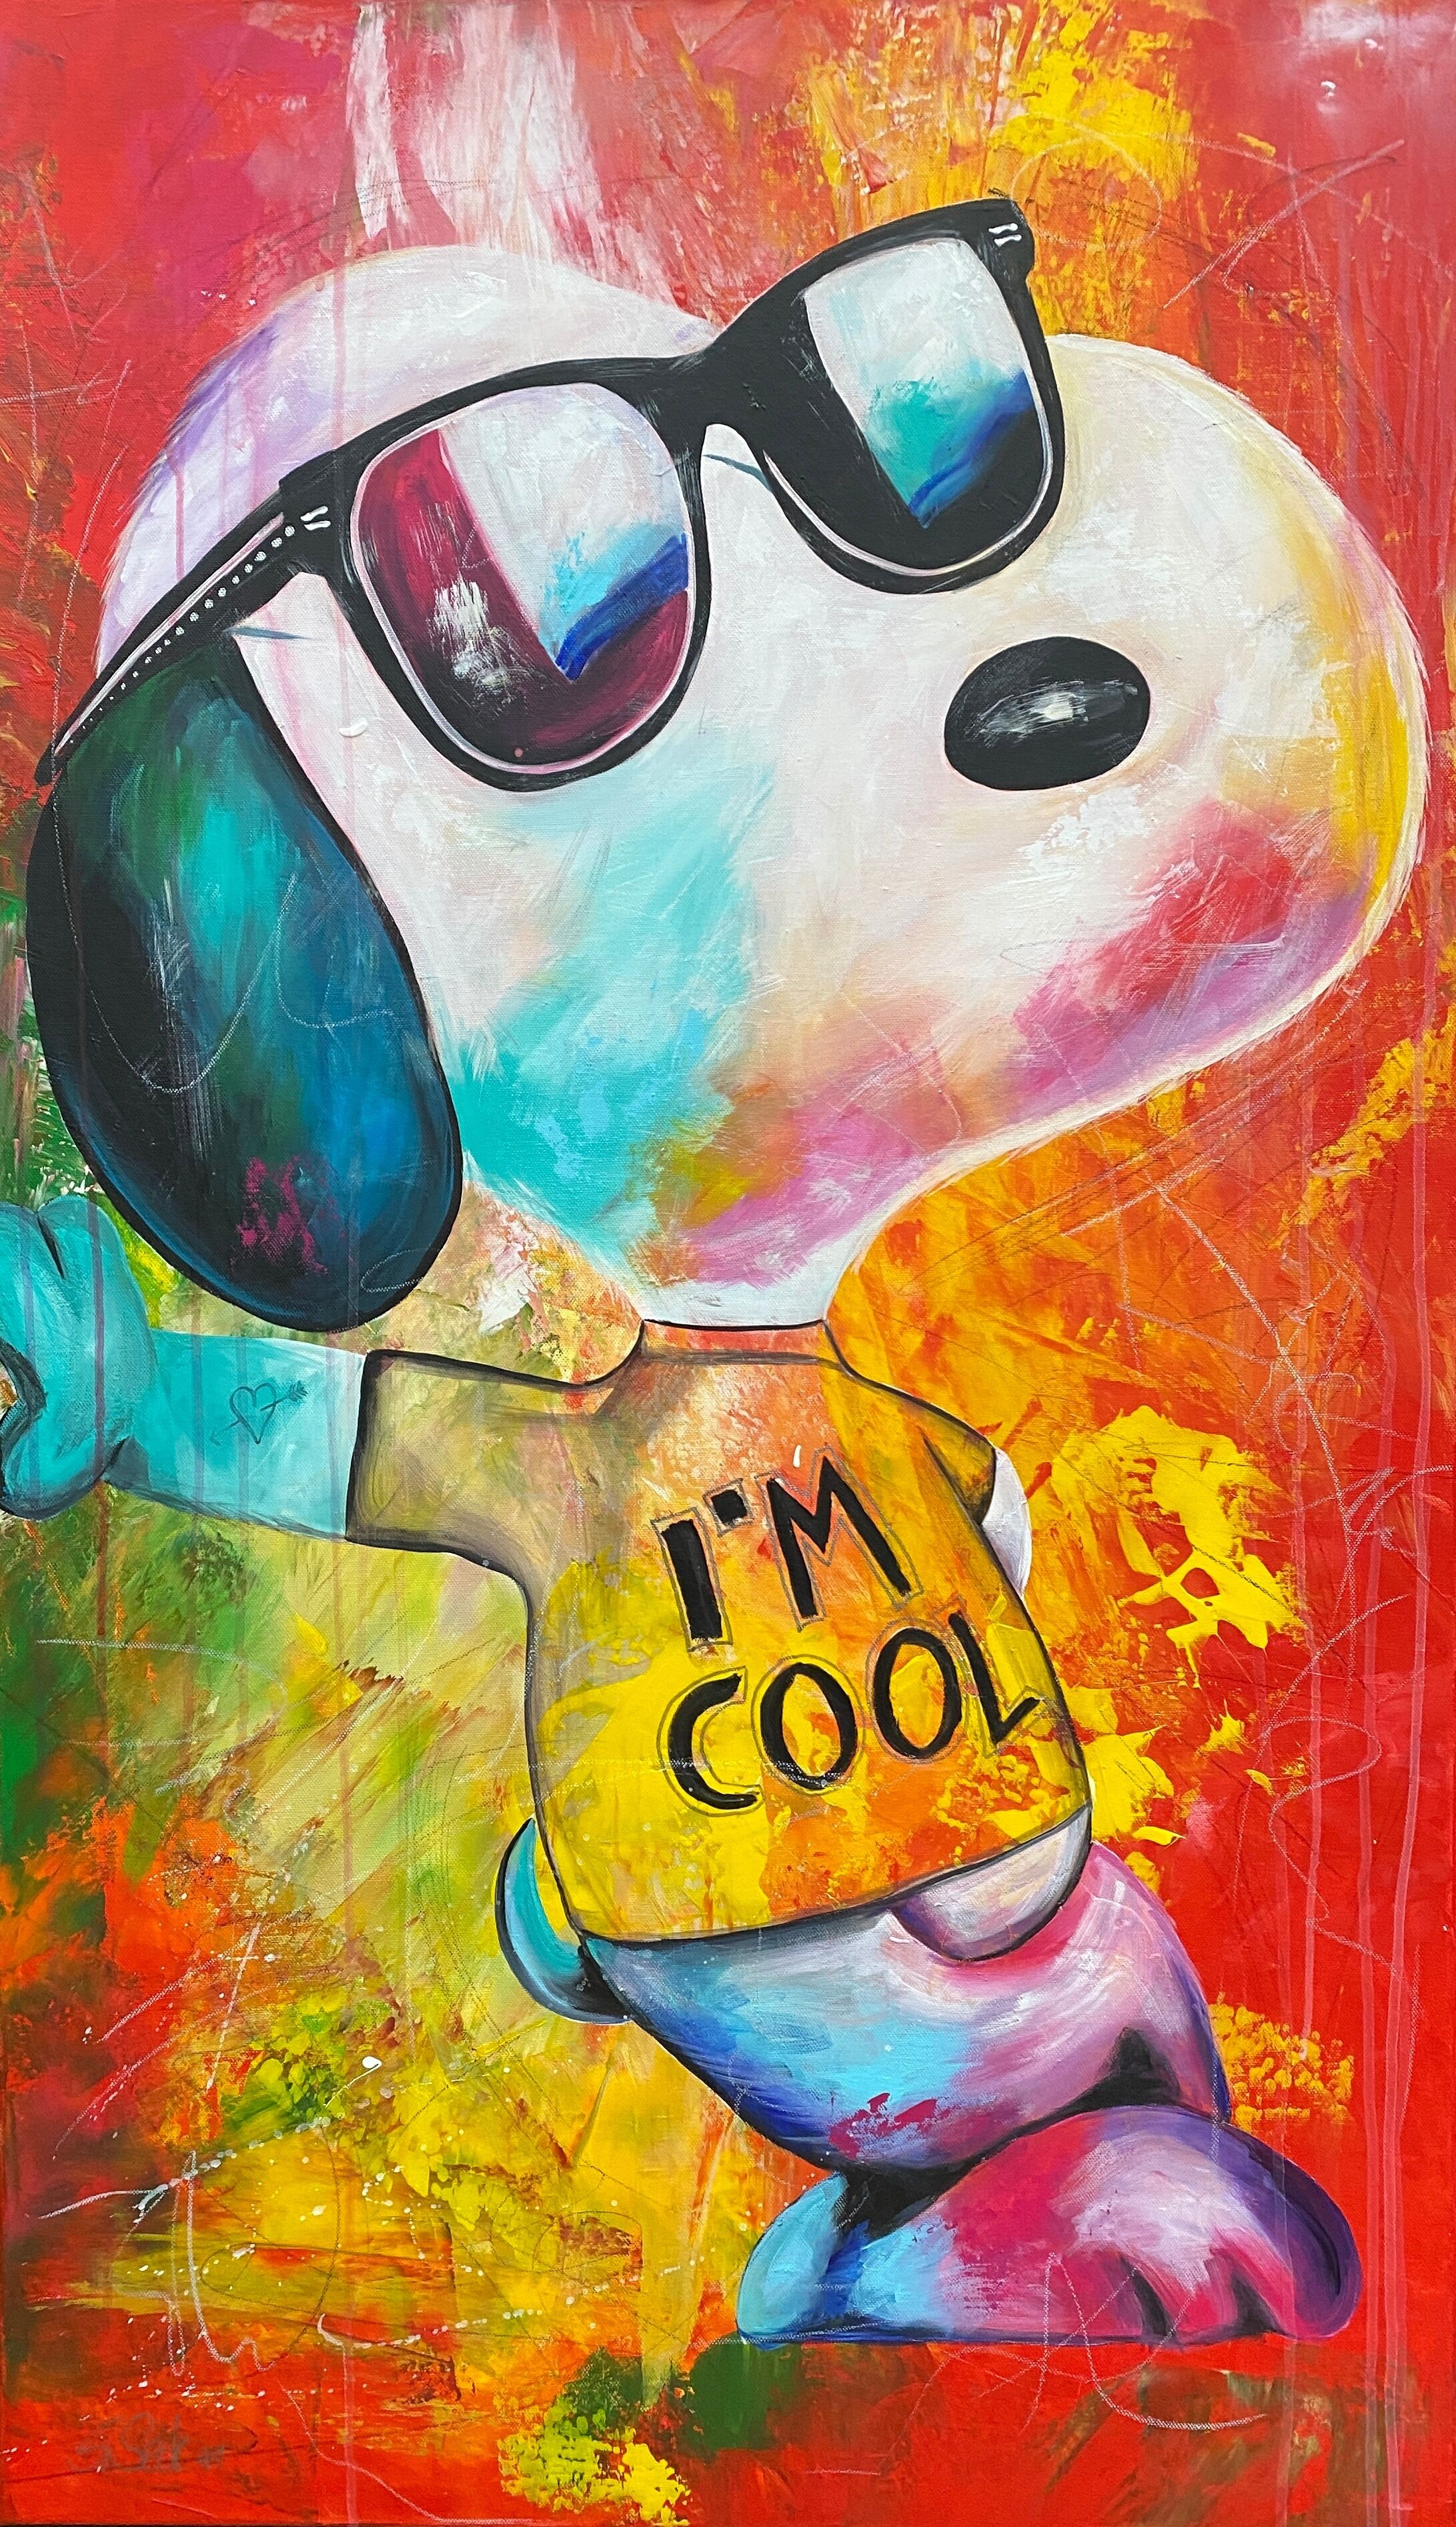 Picture "I'm cool" (2021)